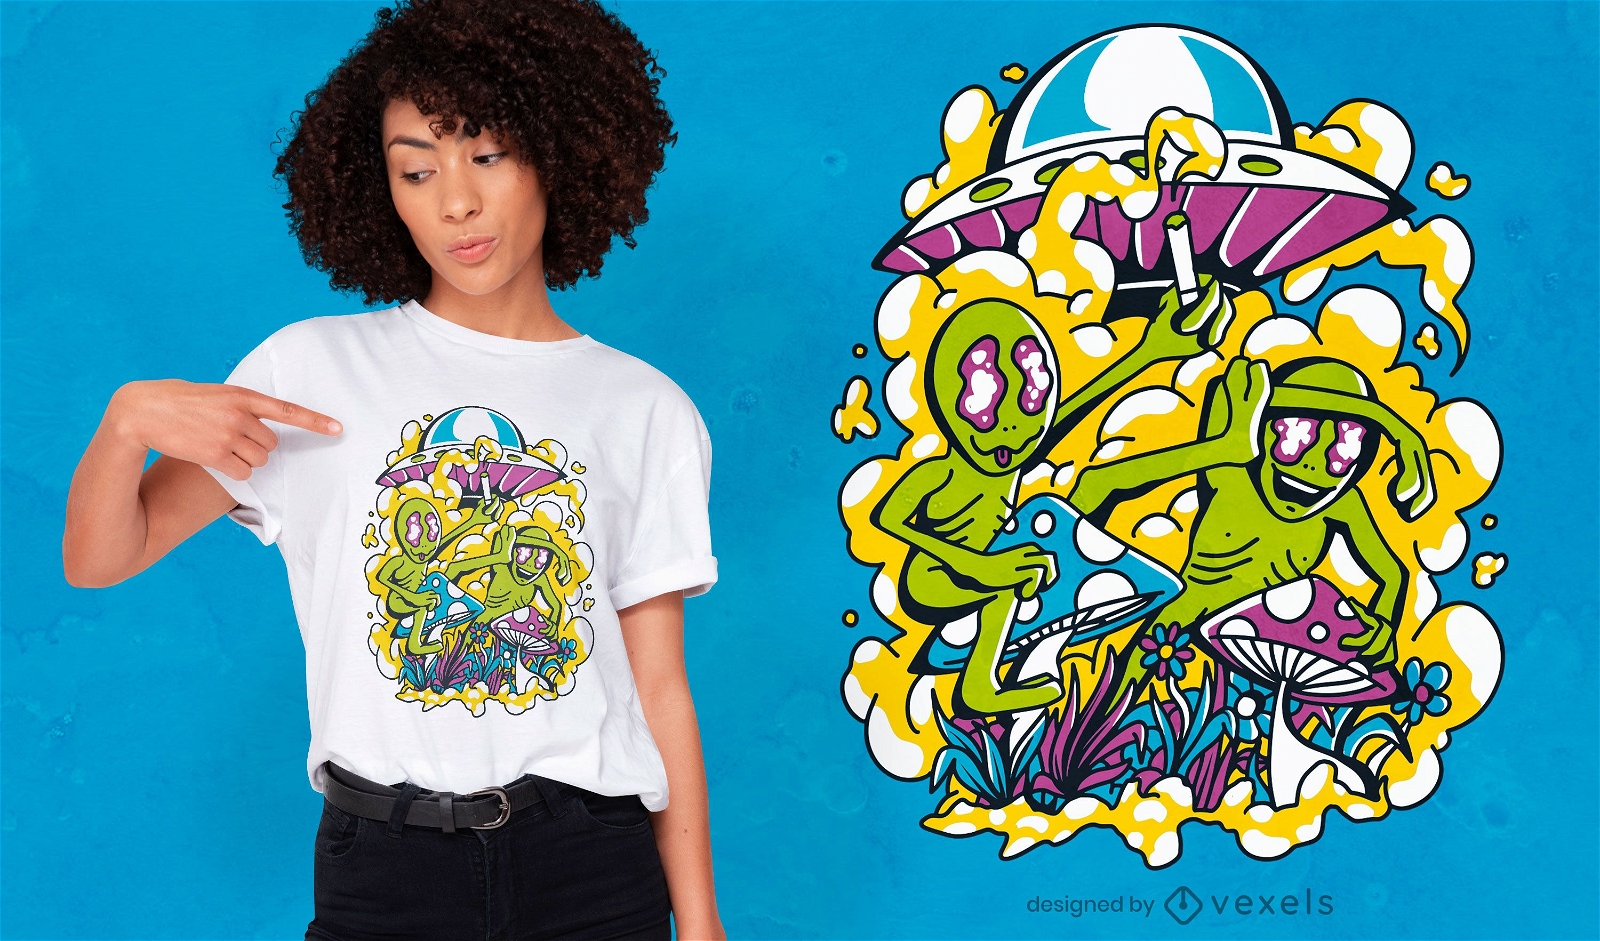 Aliens on psychedelic mushrooms t-shirt design